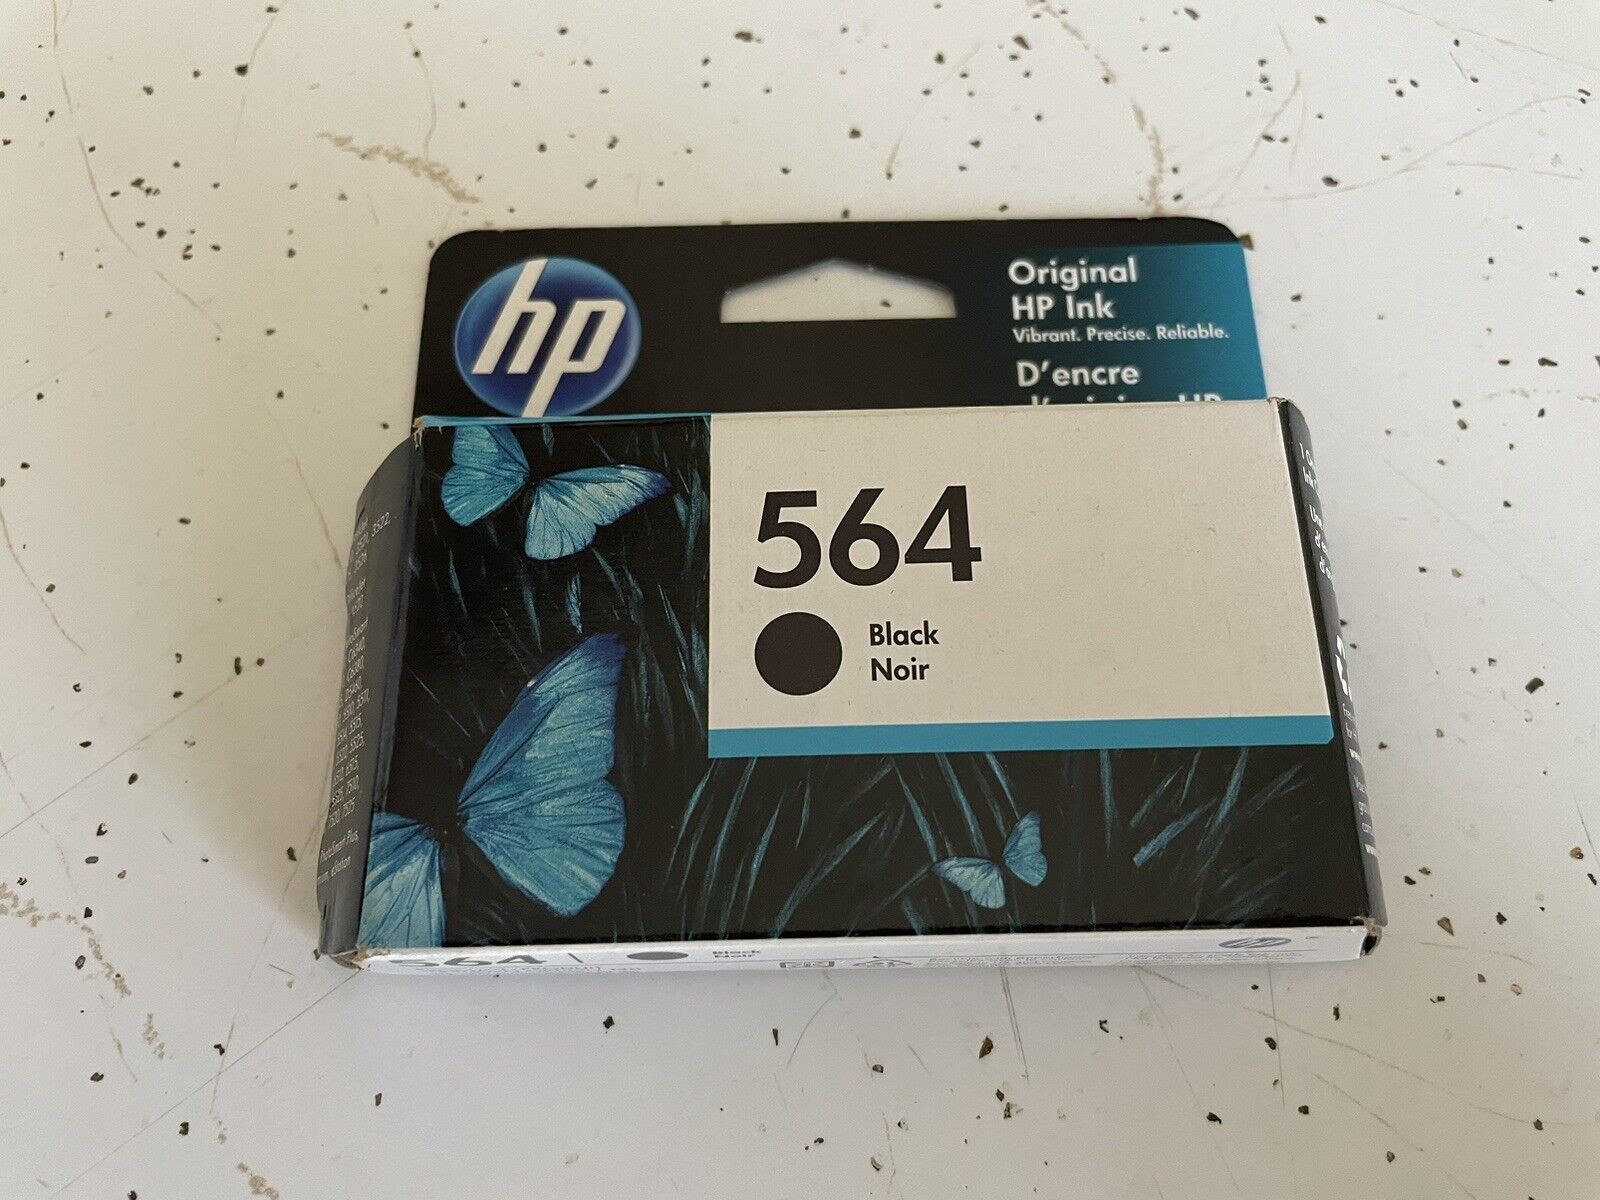 New Official HP 564 Black Ink Cartridge for Printer Expired August 2023